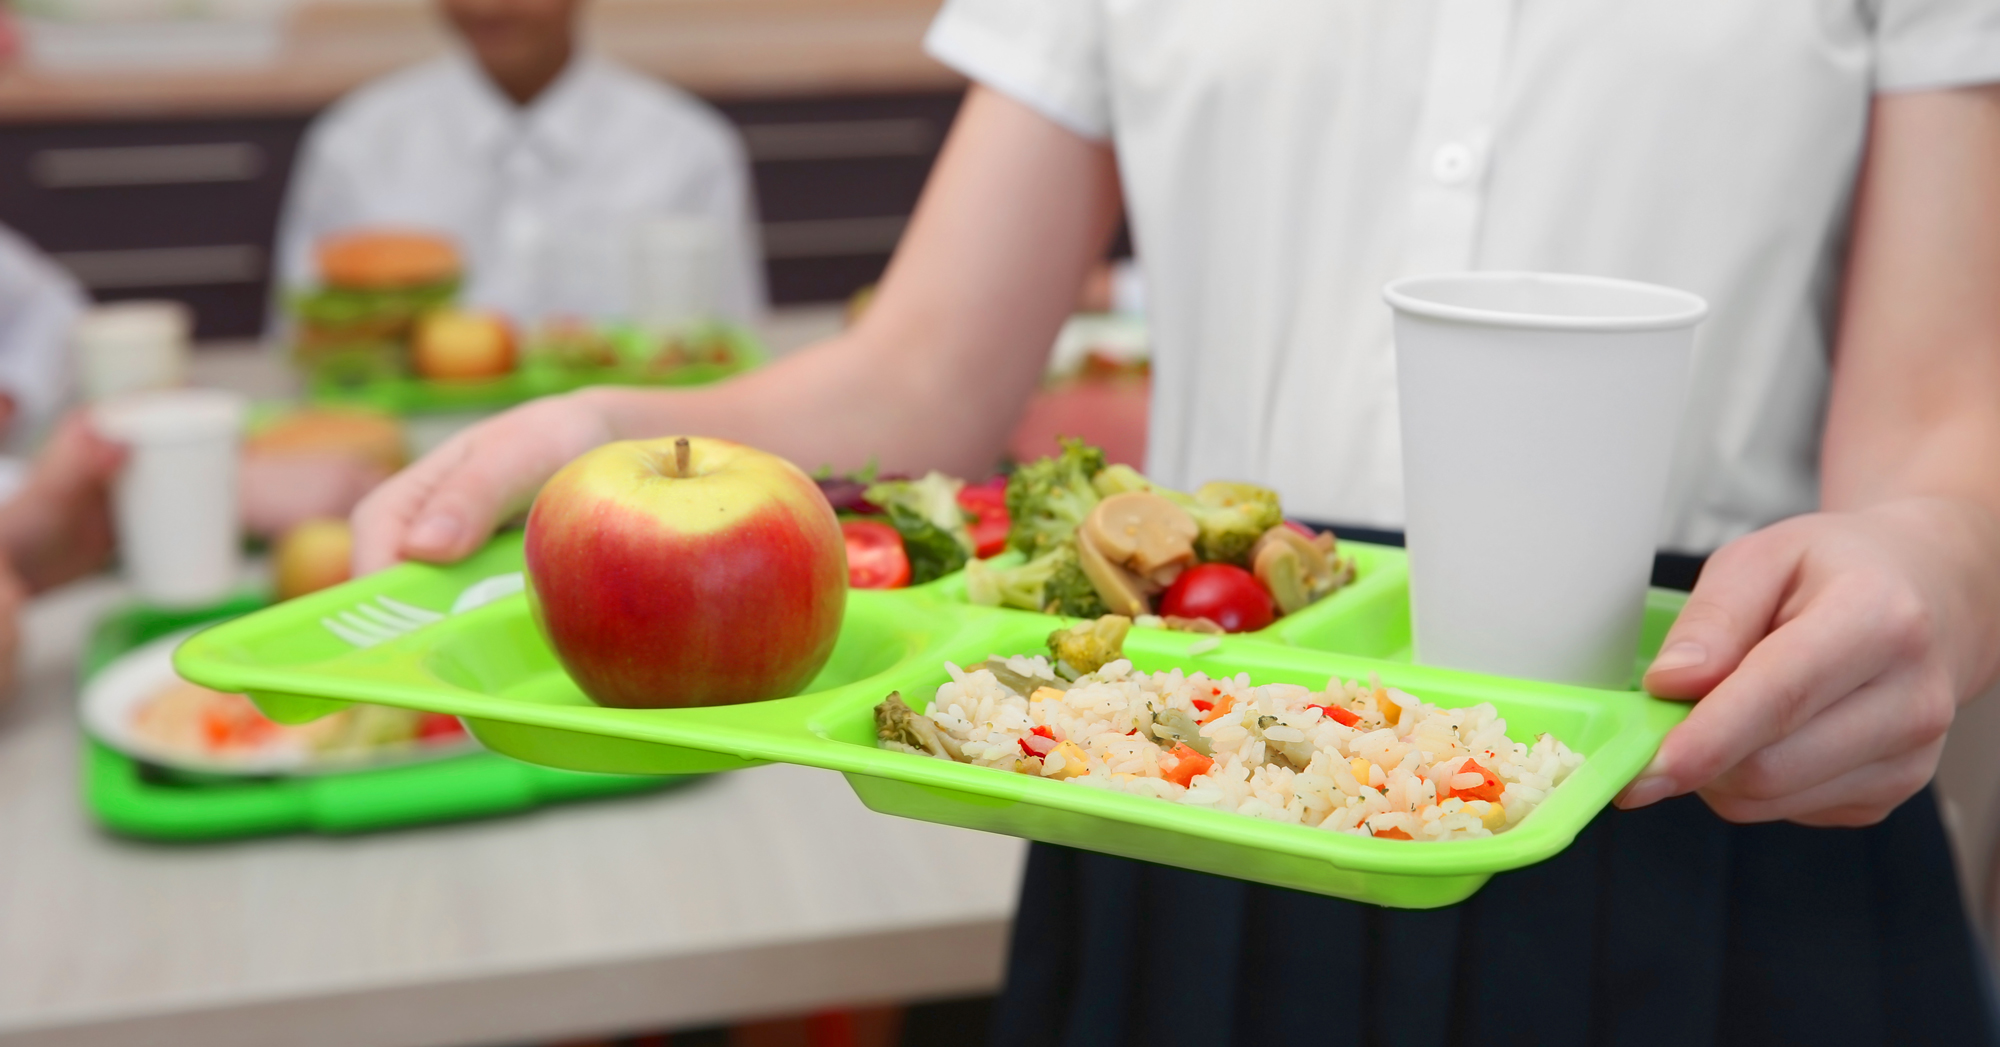 Energizing Students with School Meals